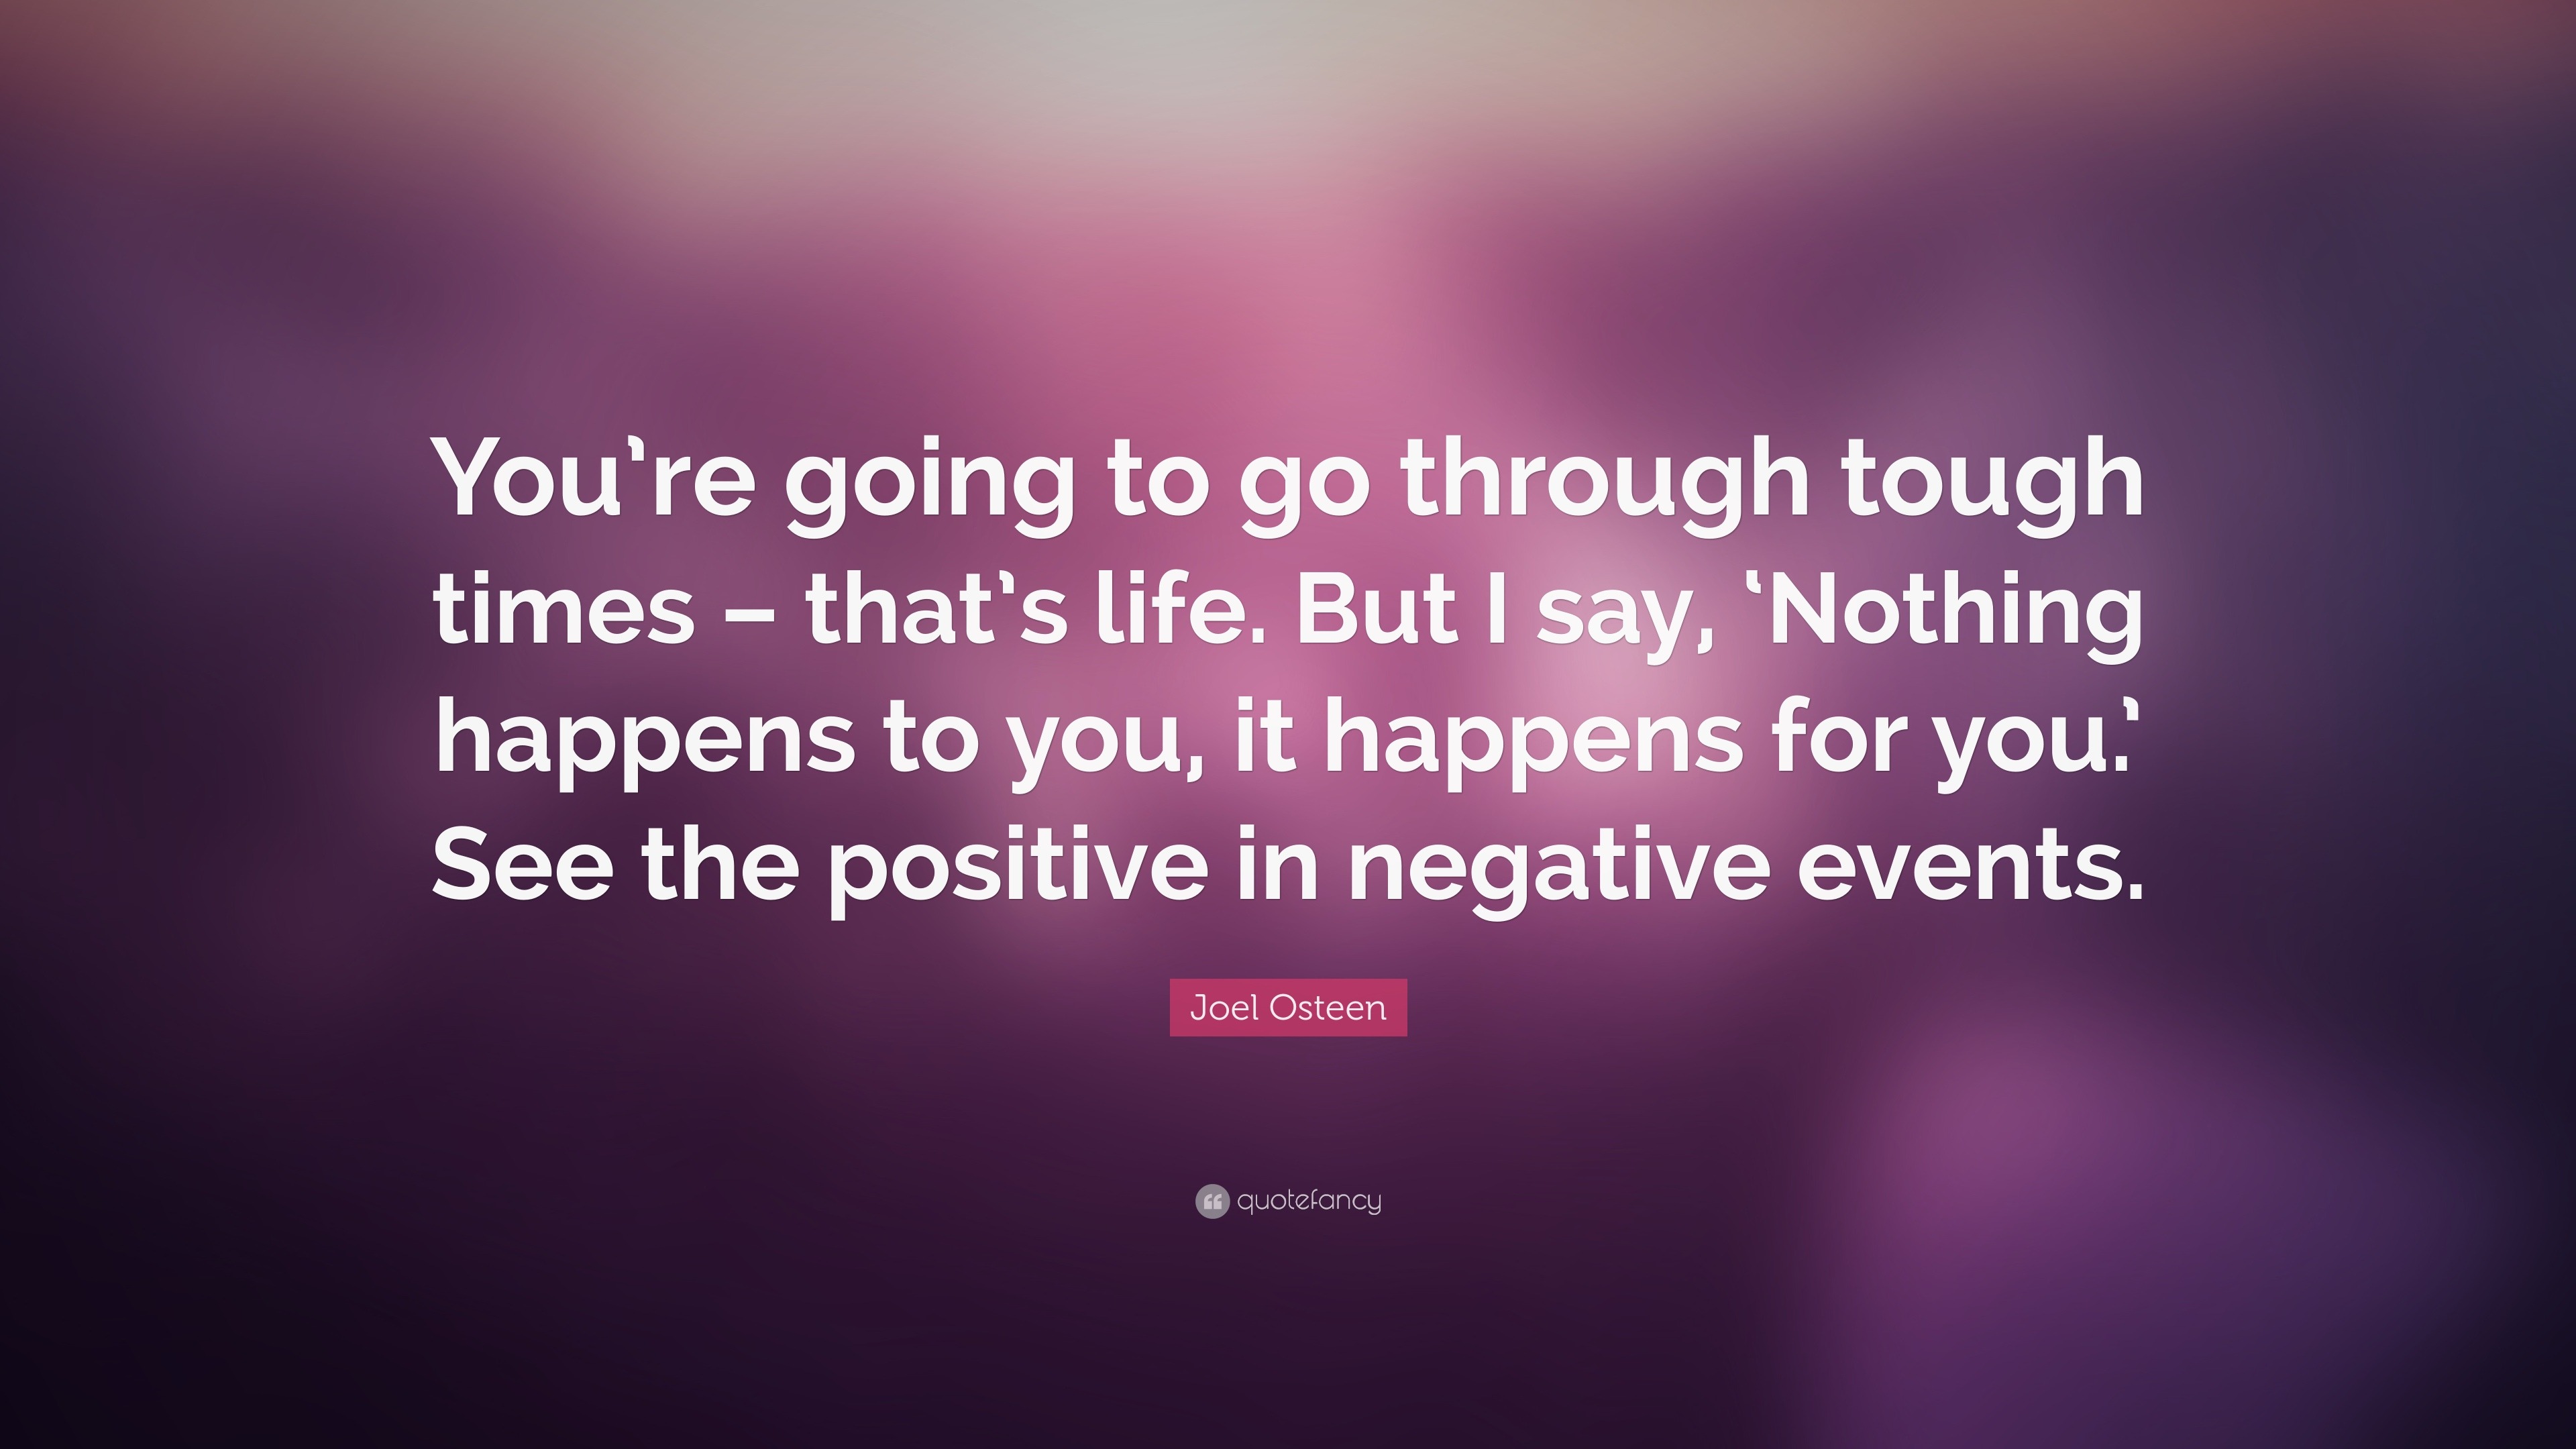 Joel Osteen Quote You Re Going To Go Through Tough Times That S Life But I Say Nothing Happens To You It Happens For You See The P 12 Wallpapers Quotefancy